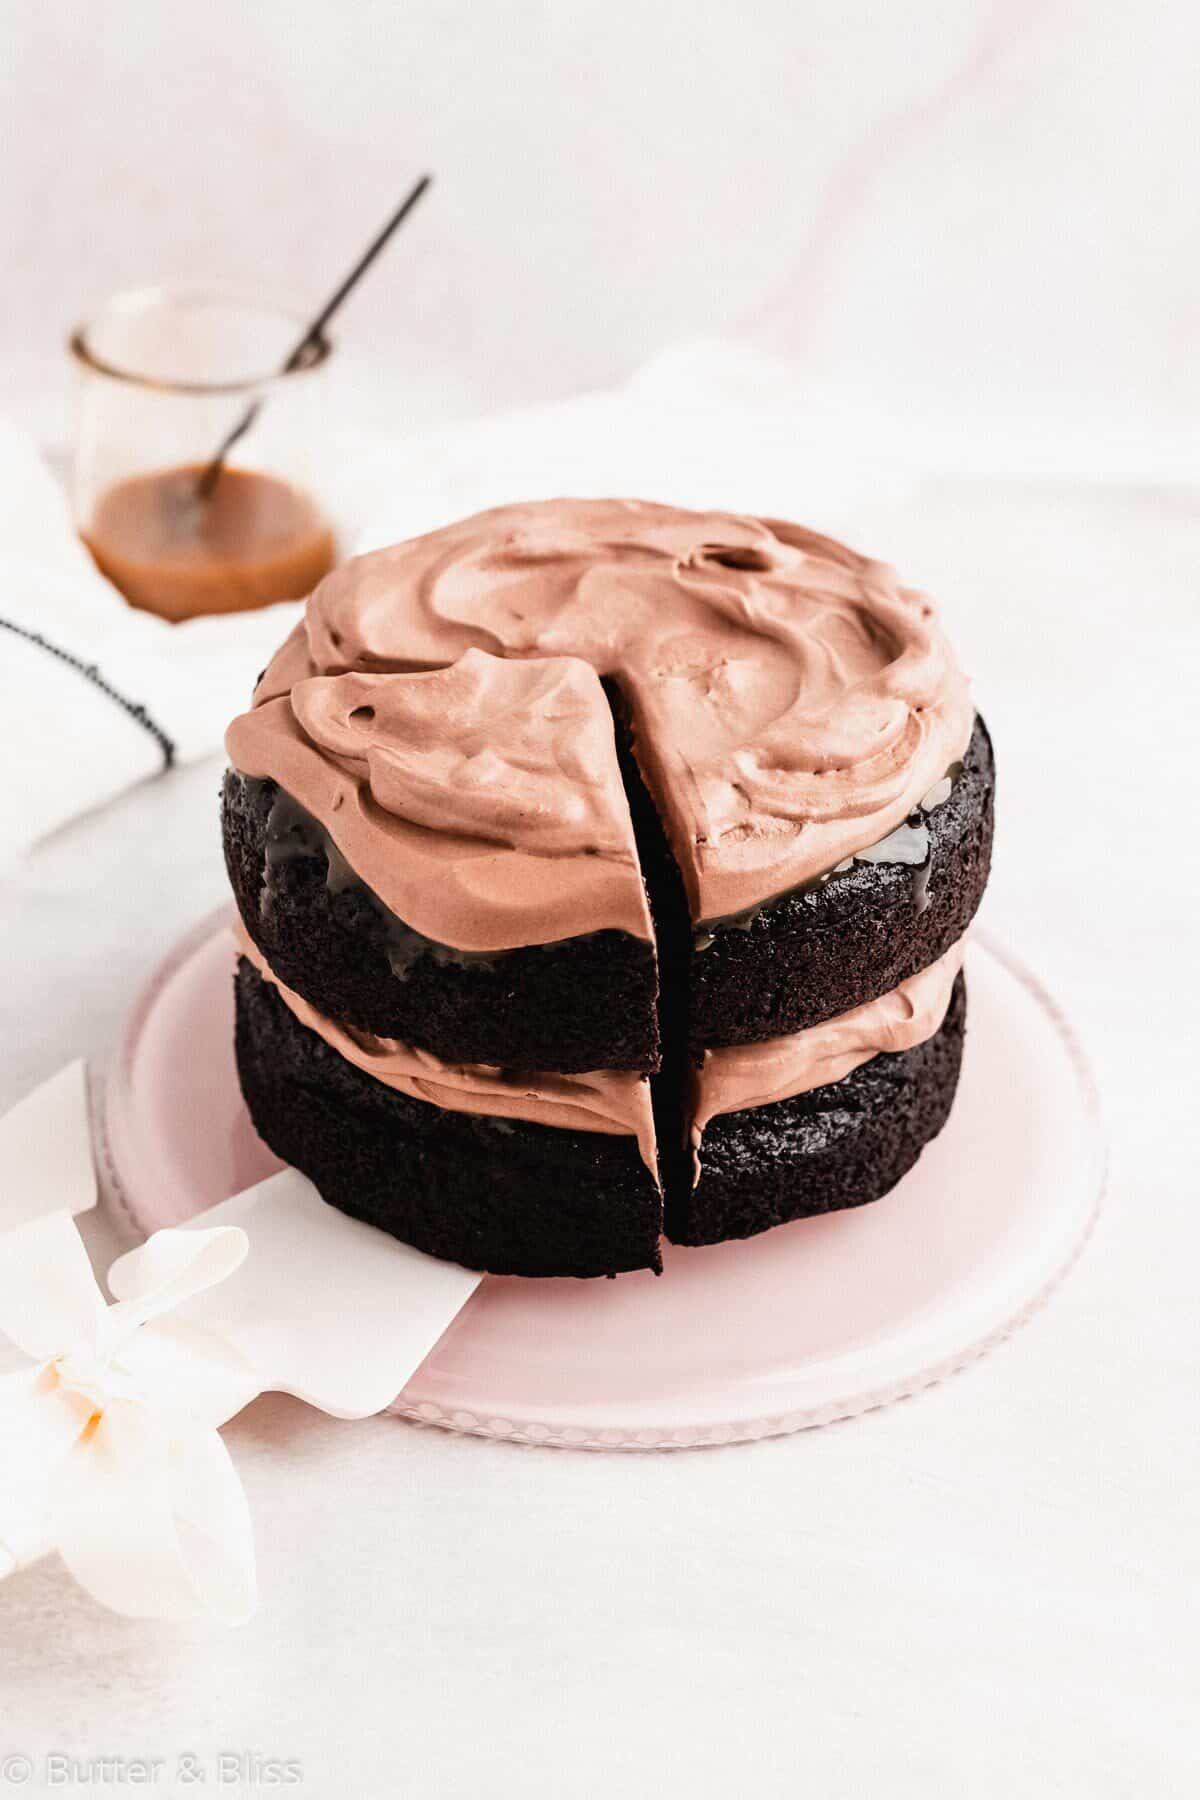 A classic mini chocolate layer cake with chocolate whipped cream on a platter.